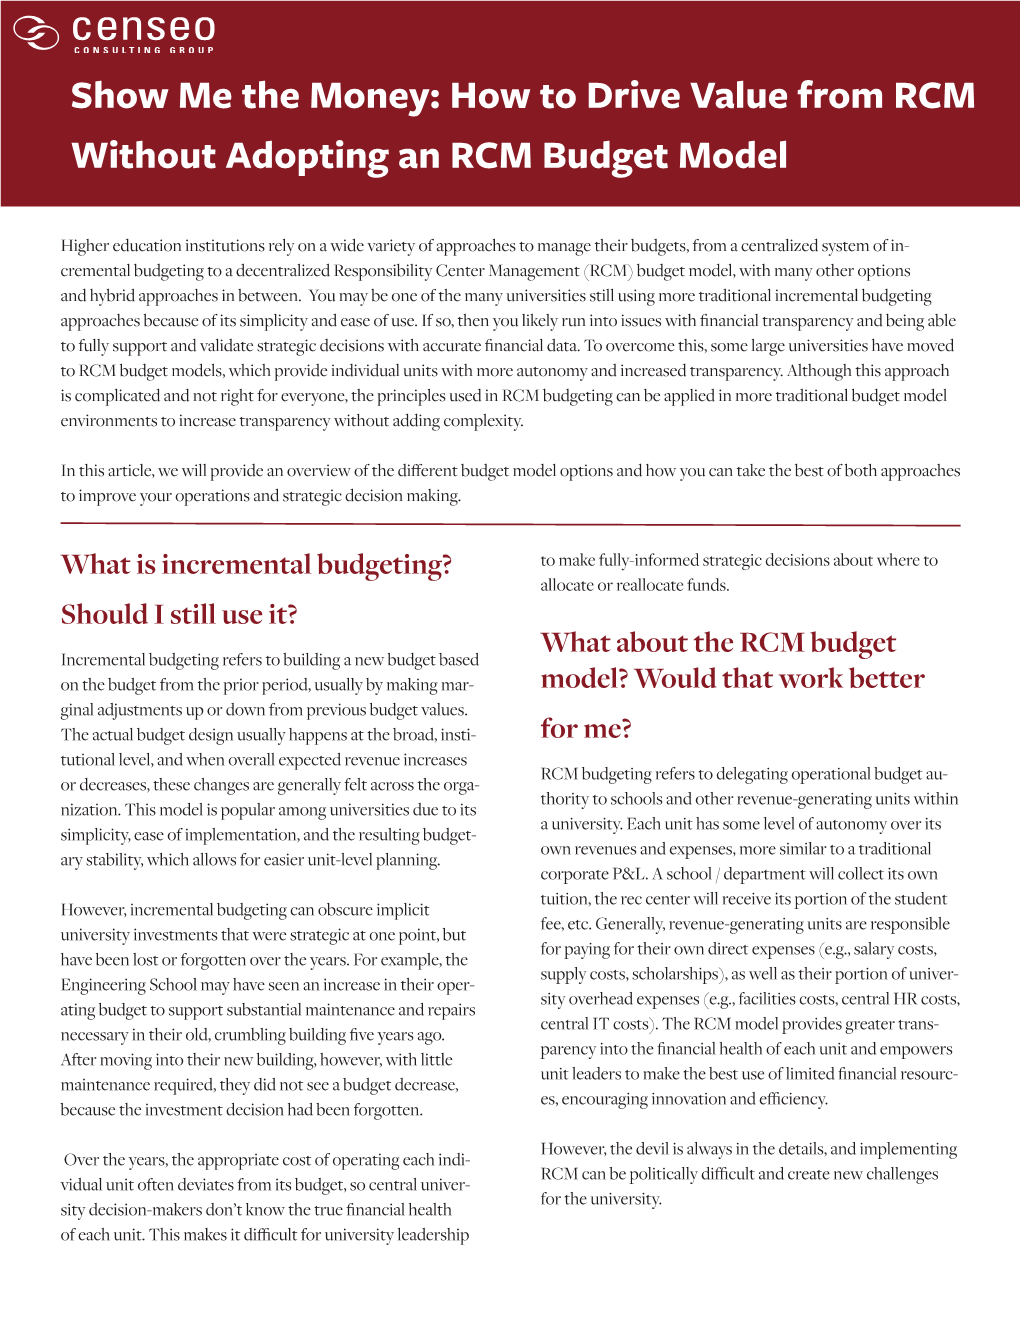 How to Drive Value from RCM Without Adopting an RCM Budget Model